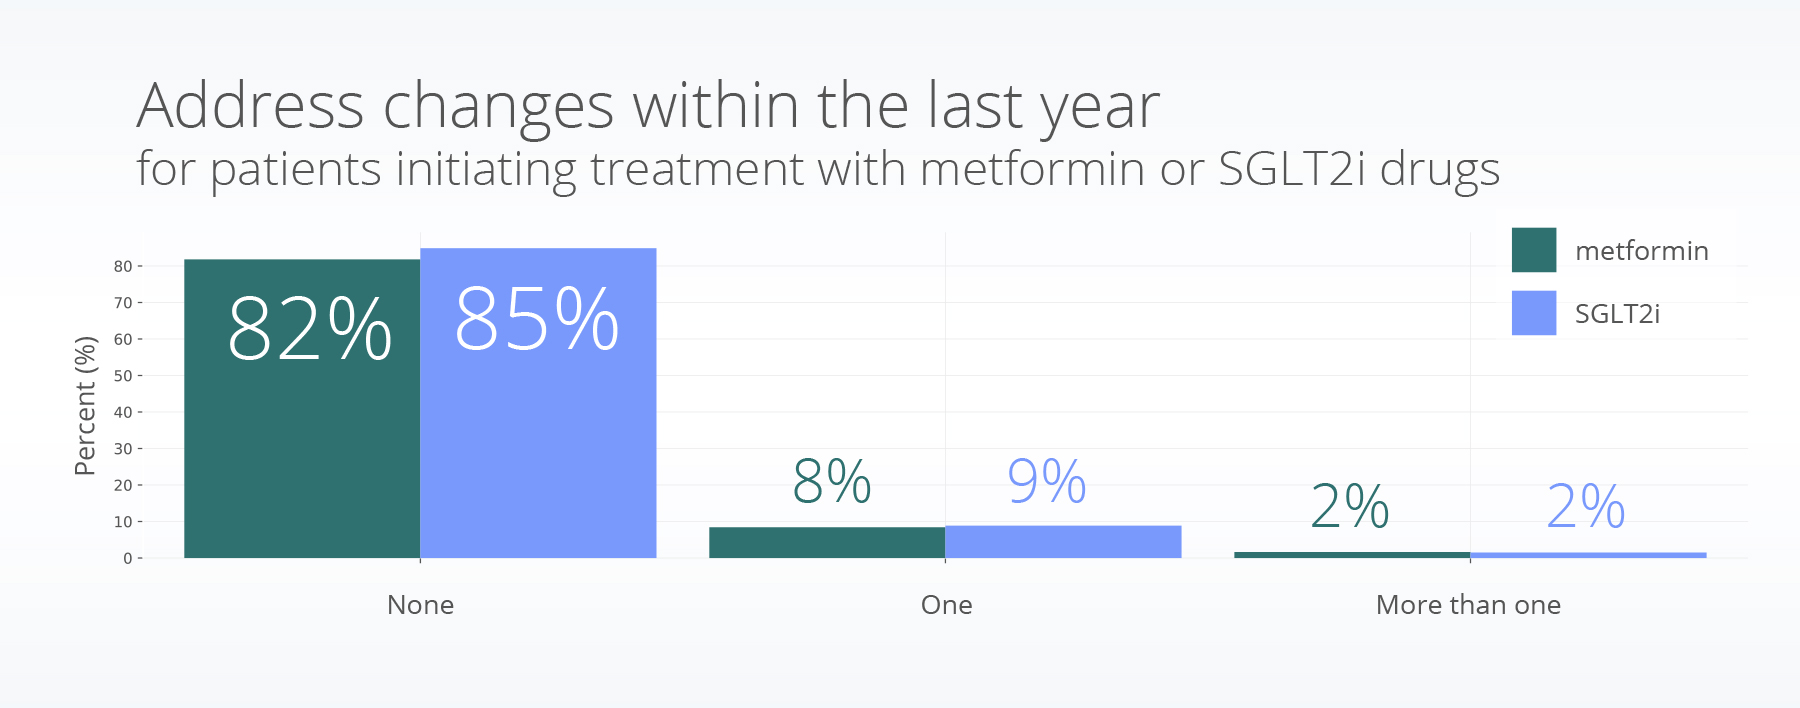 Address changes within the last 12 months for patients initiating treatment with metformin or SGLT2i drugs